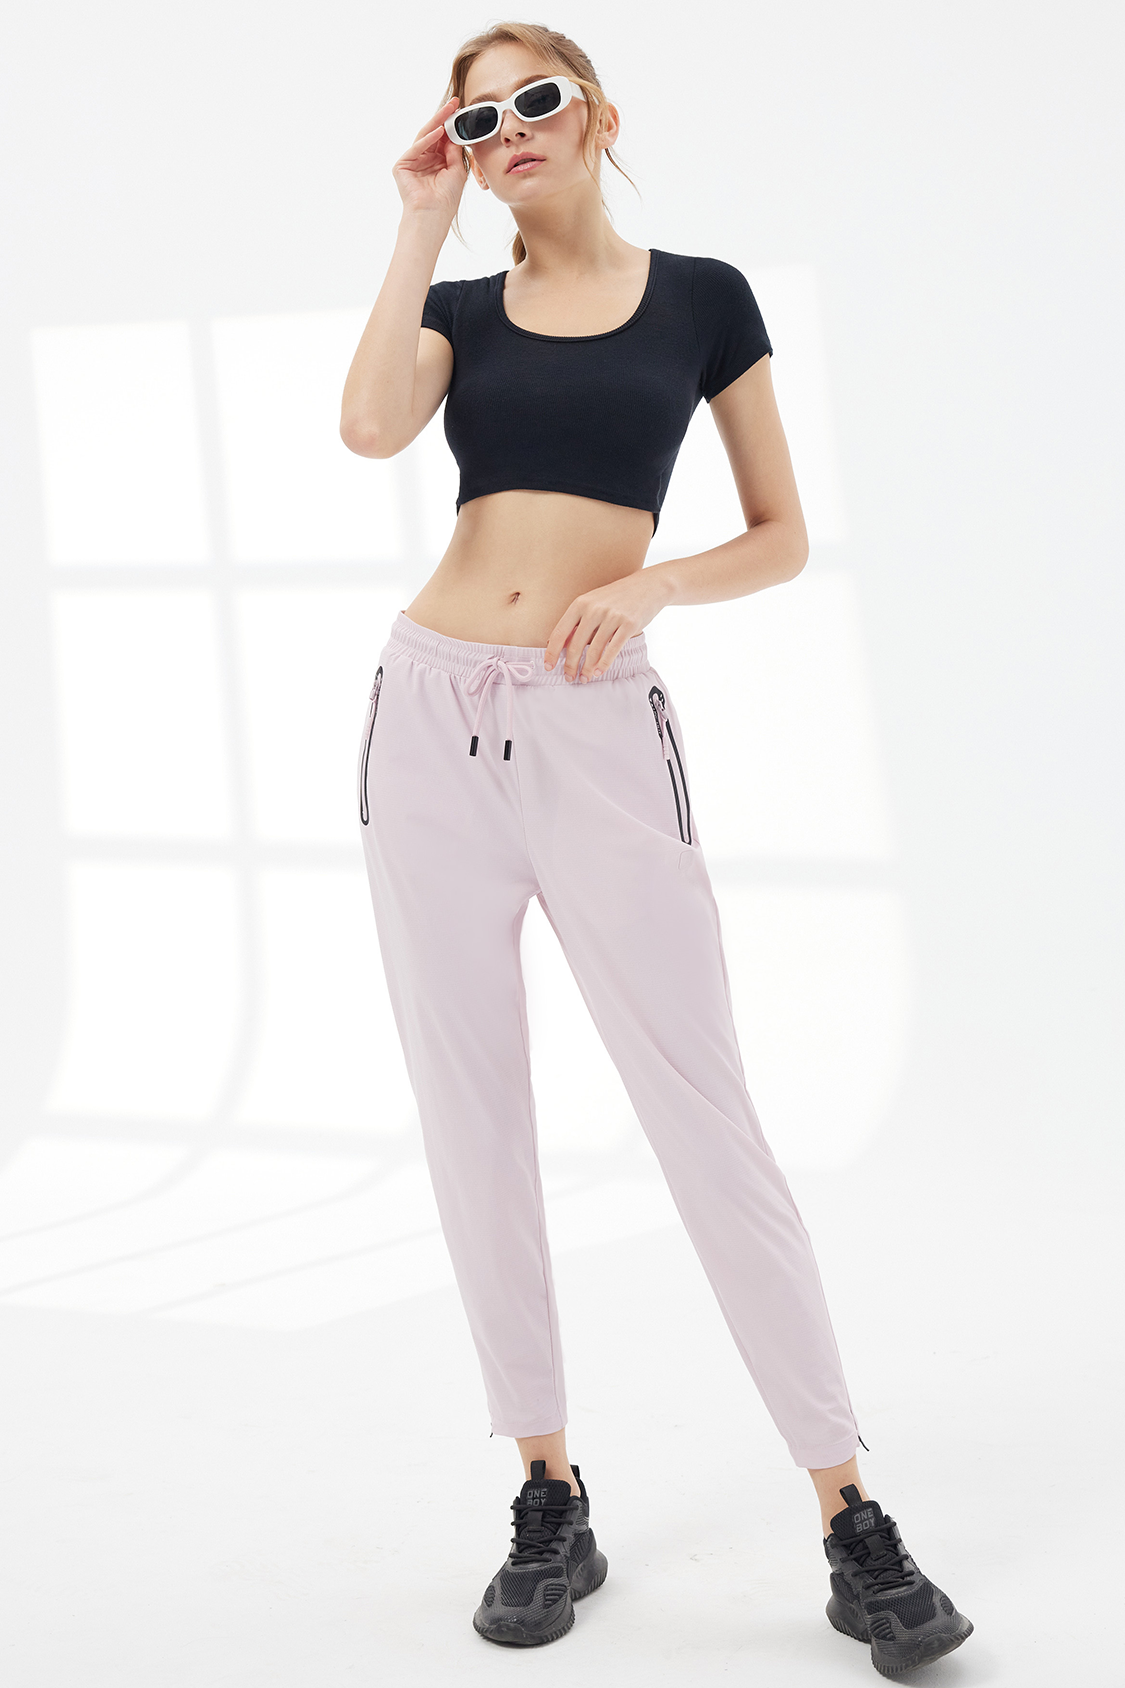 IceTech Ultra Breathable Stretch Pants For Women